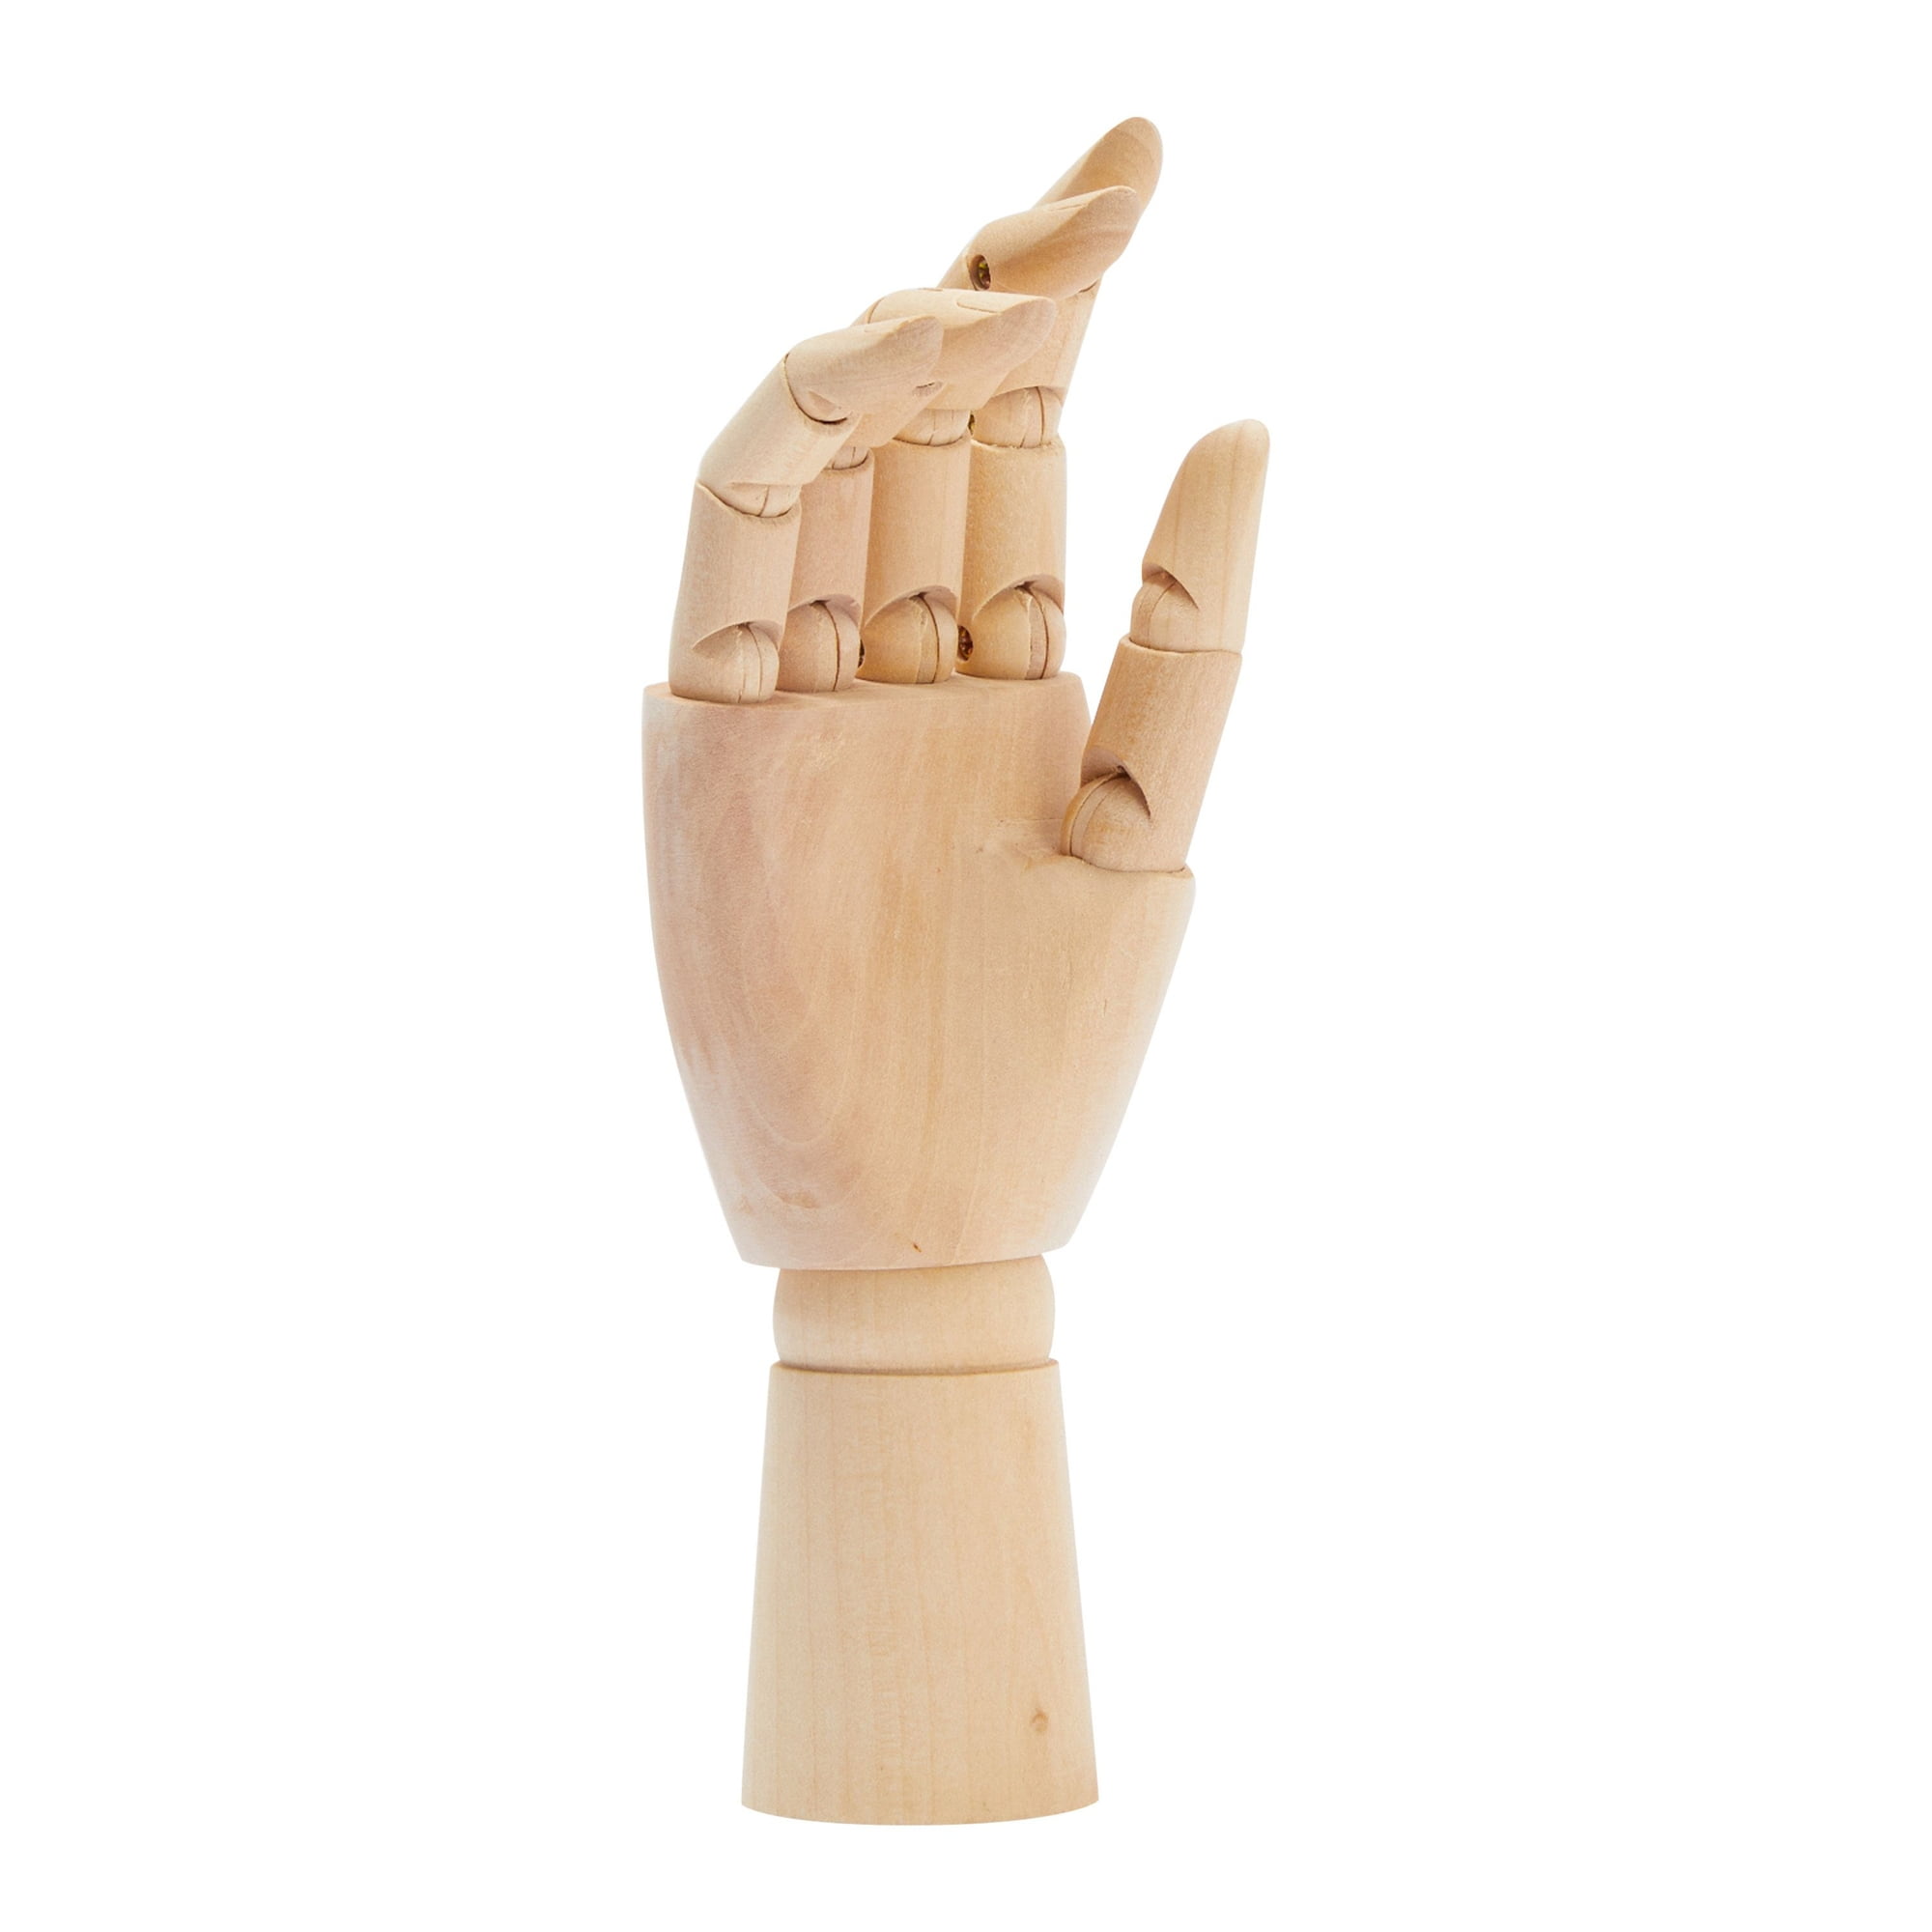 Wooden Hand Model, 2 PCS, 7 Inches Left and Right Hand Art Mannequin Figure  with for Hand Jewelry Display, Decoration, Sketching, by GNIEMCKIN..